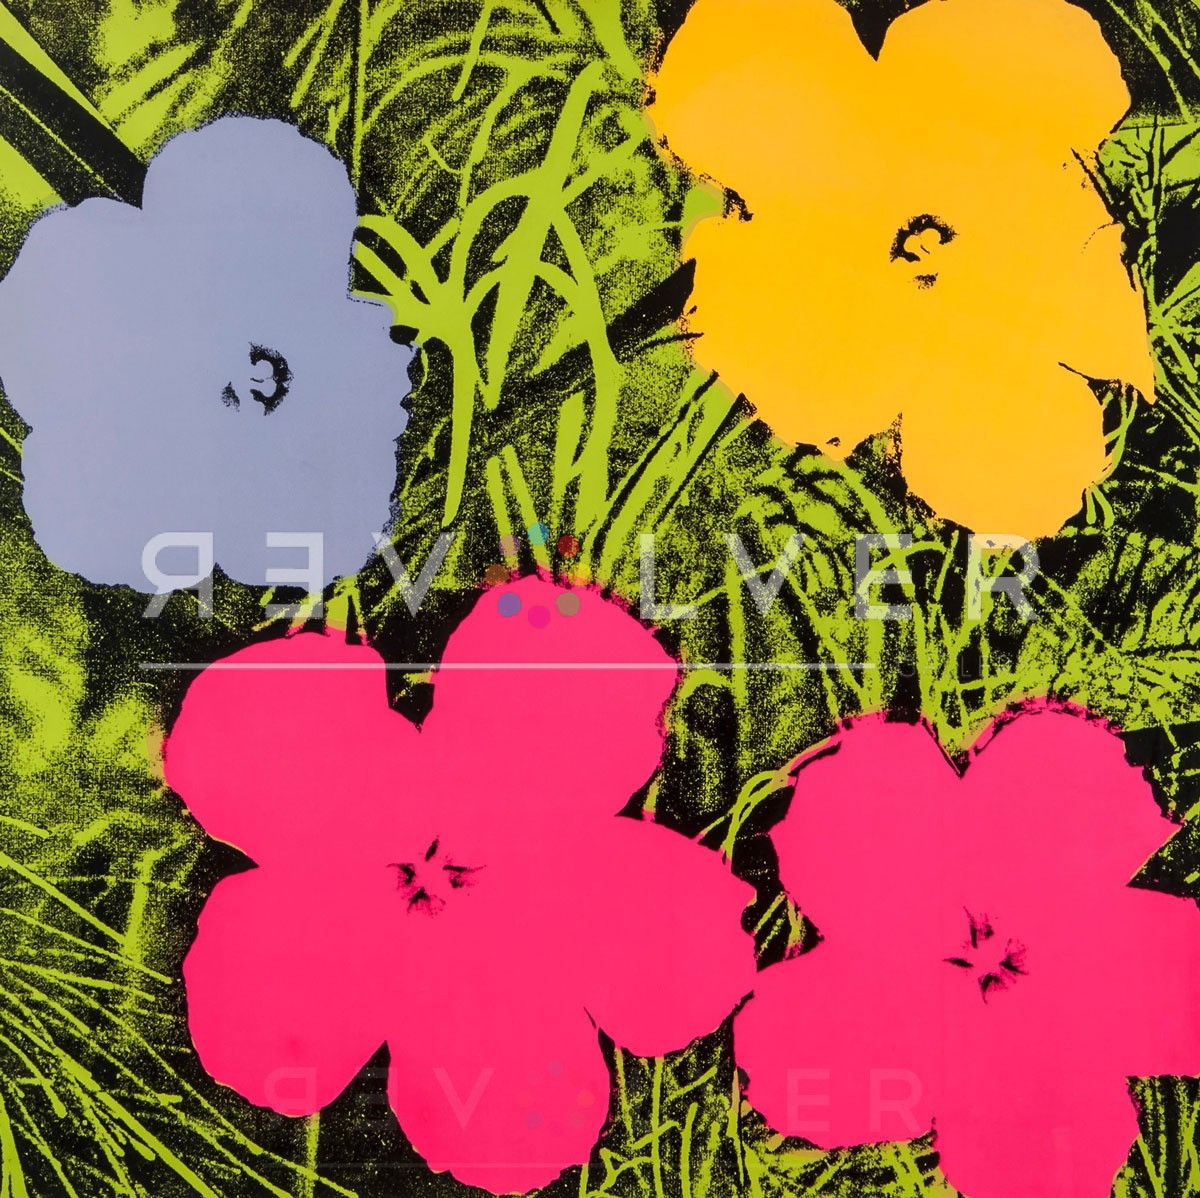 Flowers 73 by Andy Warhol